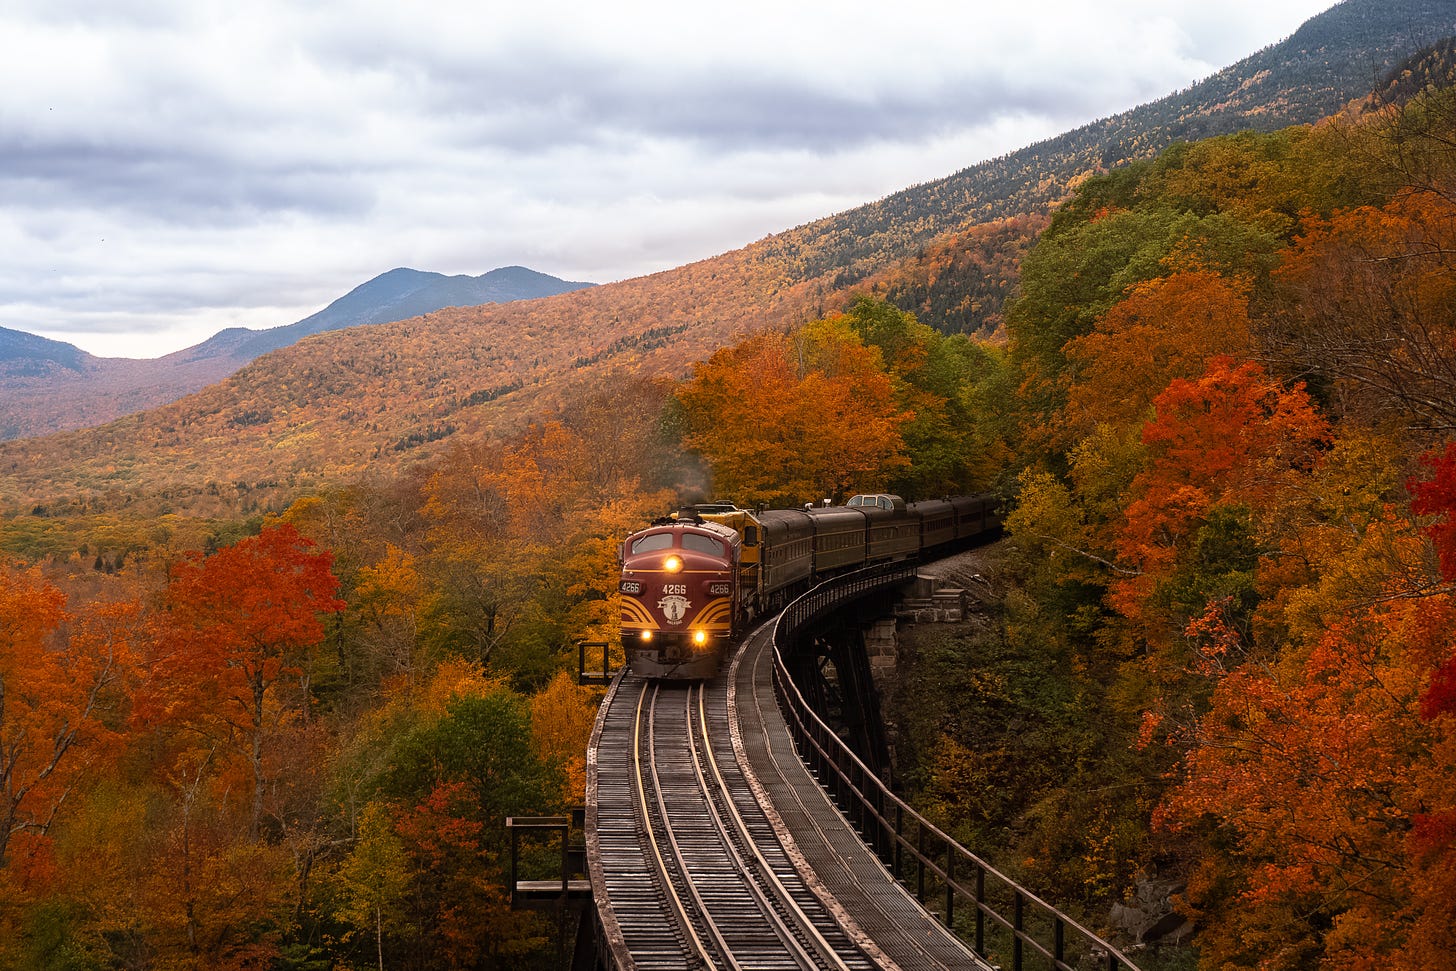 Photo of a train coming around a track, surrounded by autumn leaves in a mountainous landscape